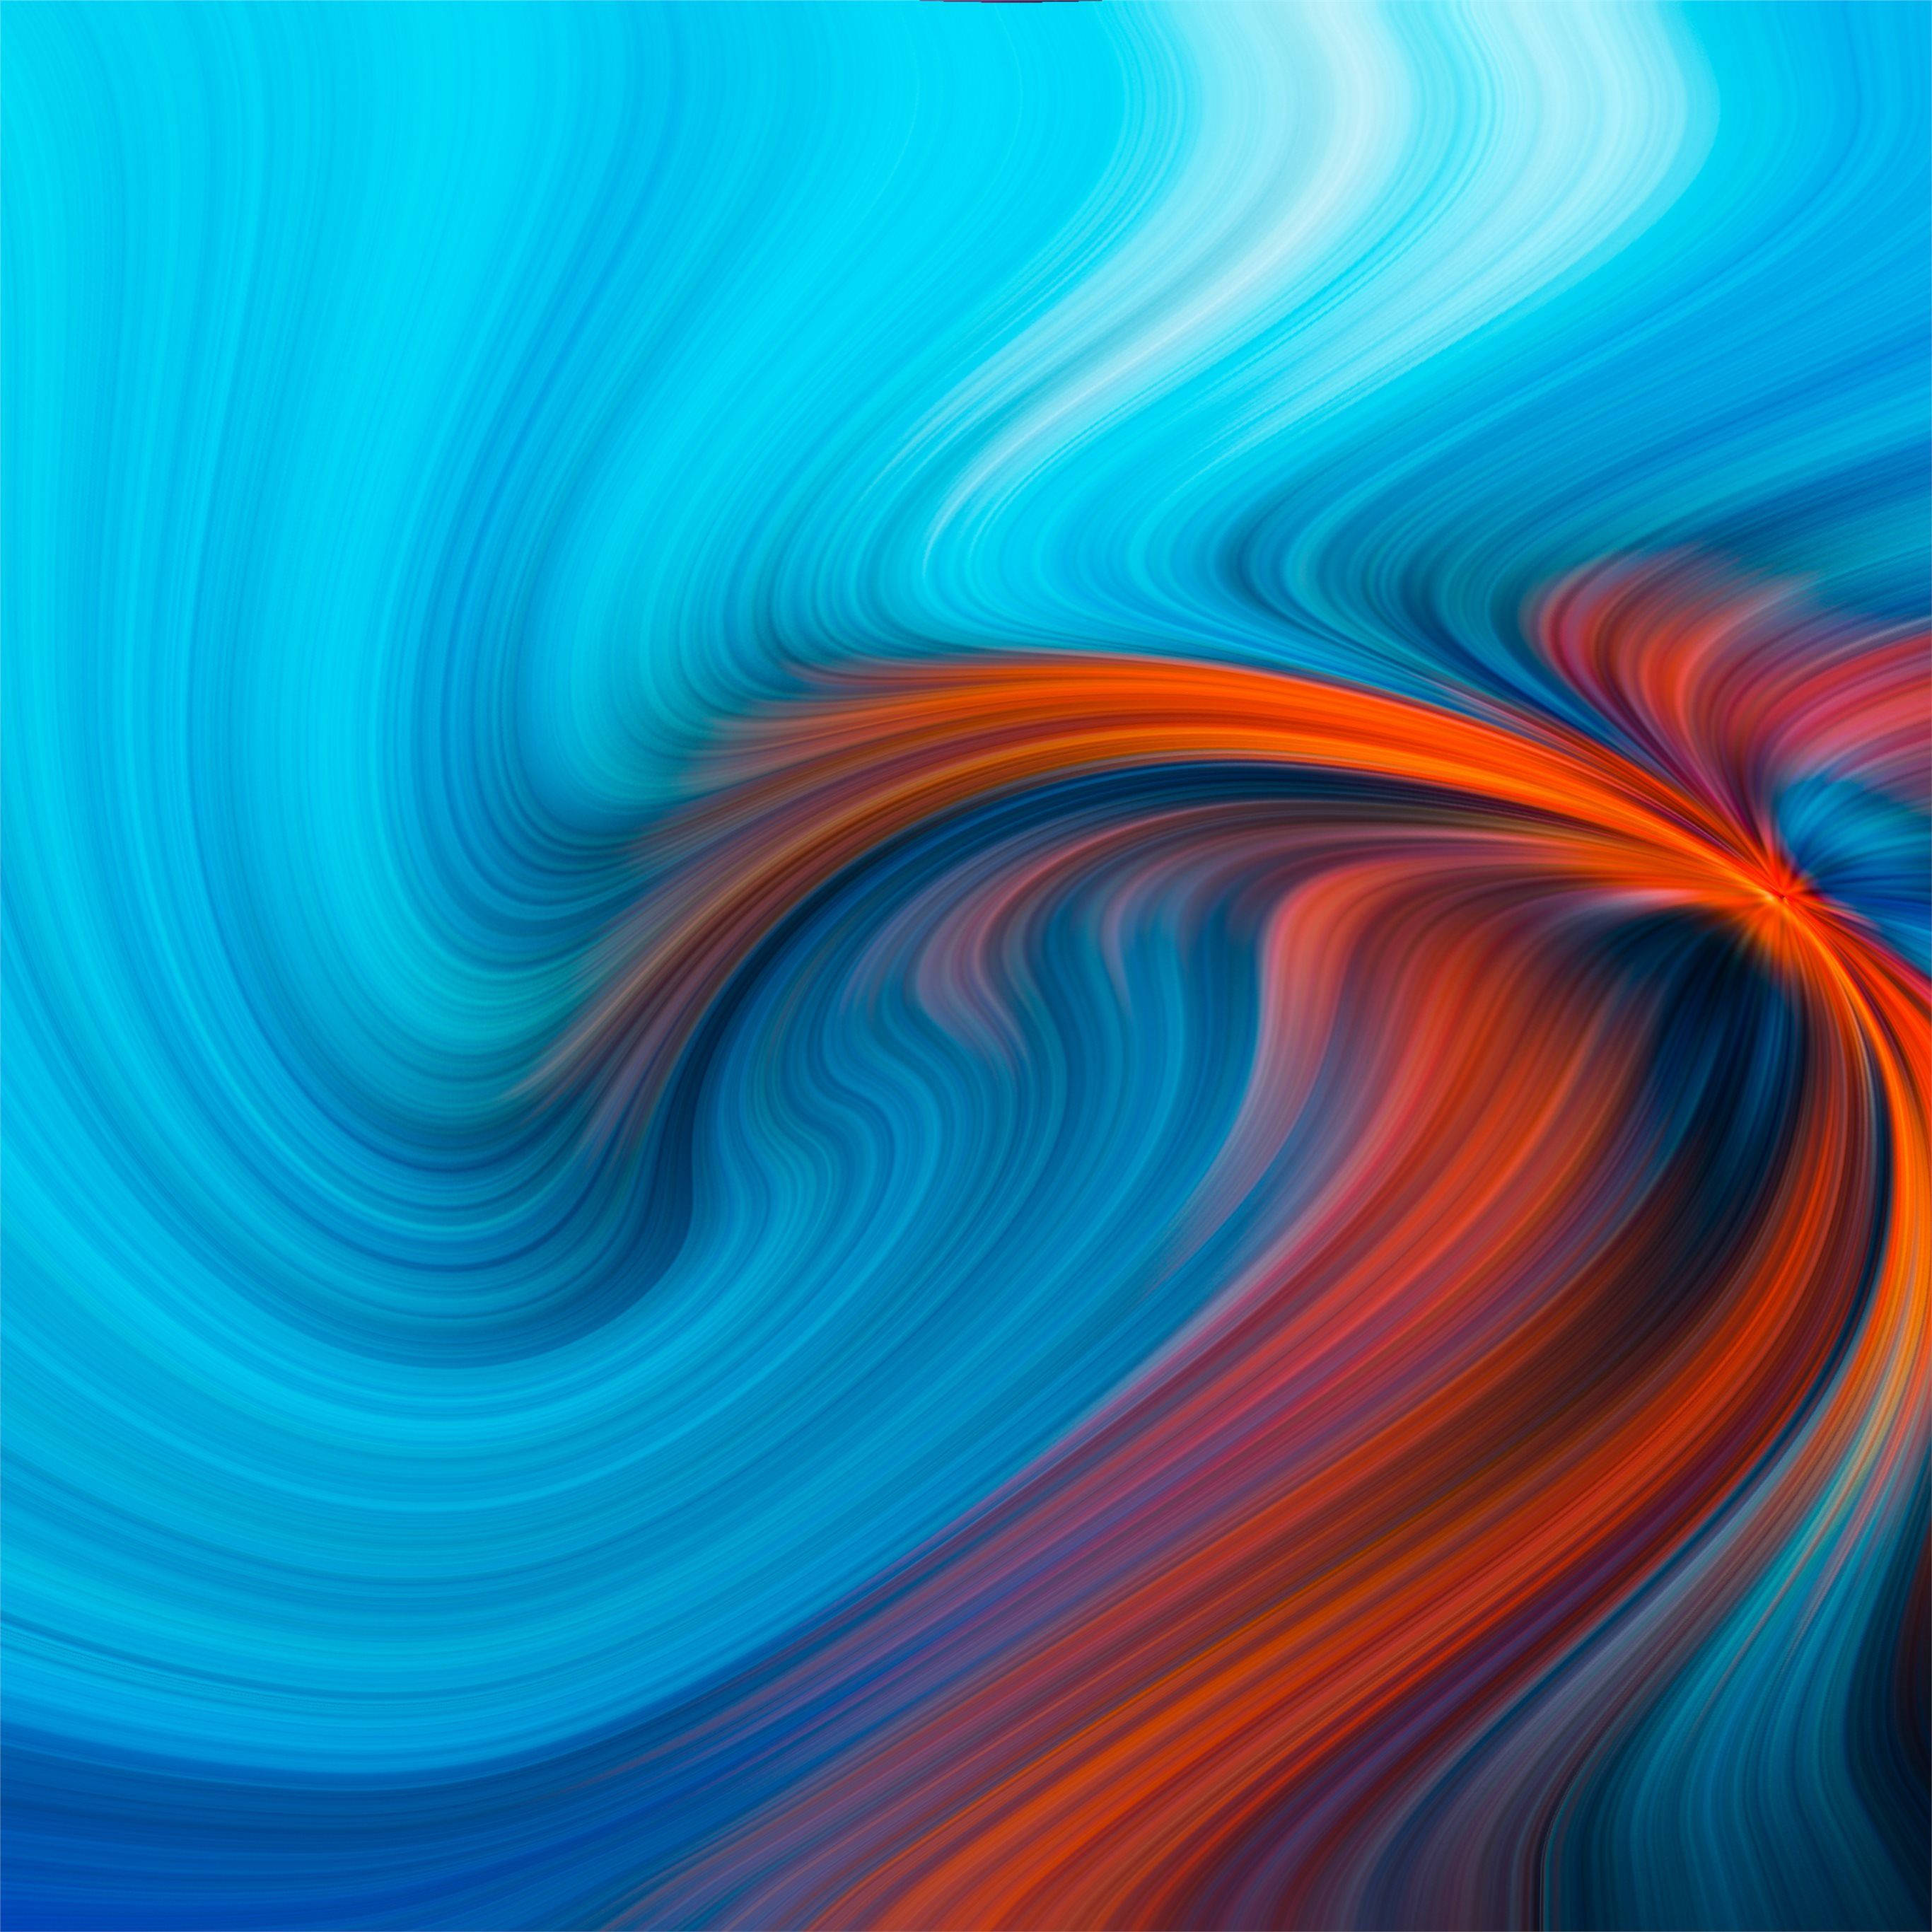 Official Ipad Theme In Abstract Illustration Wallpaper